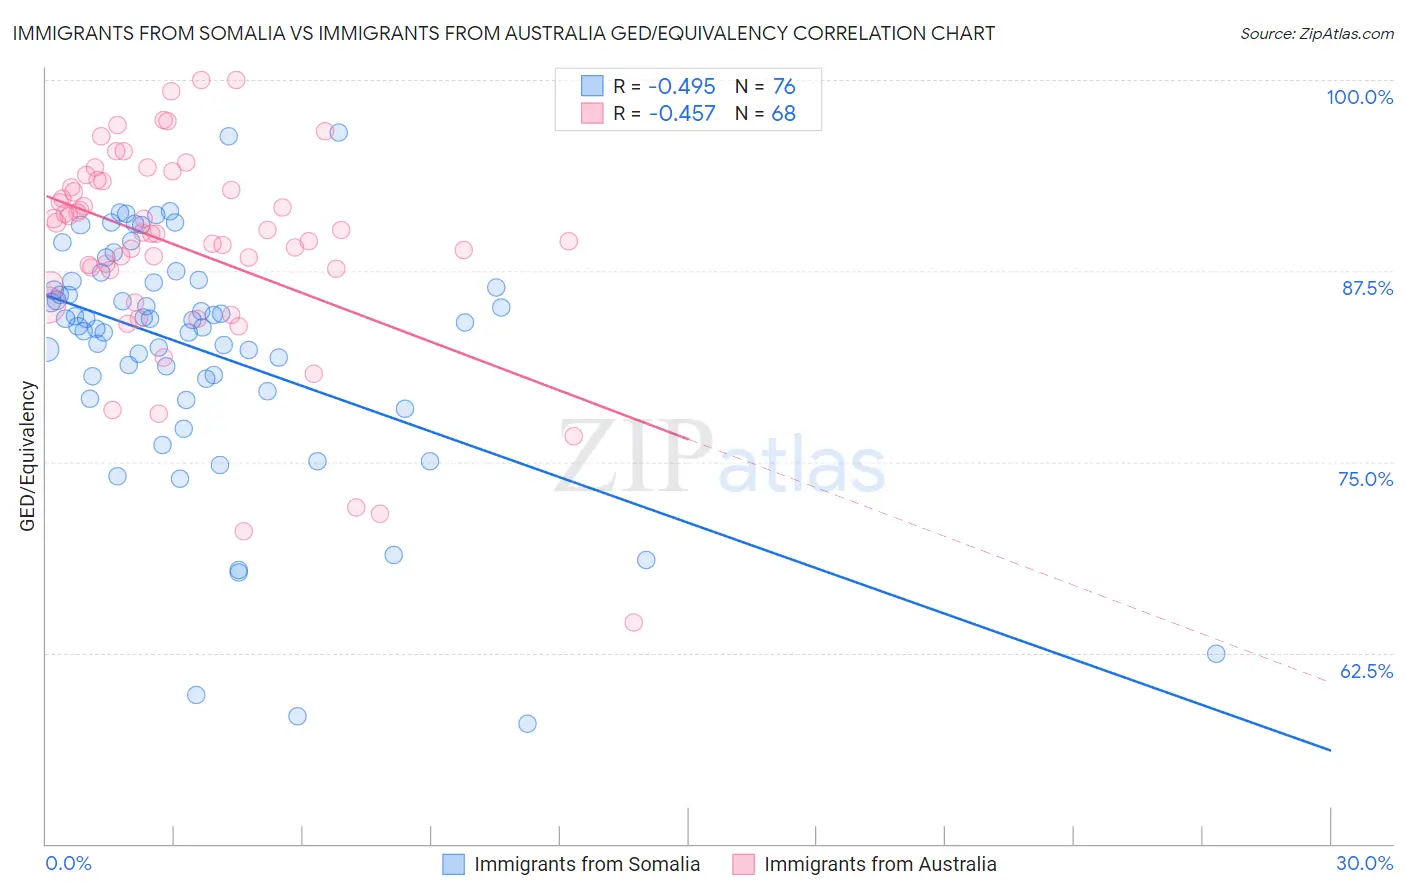 Immigrants from Somalia vs Immigrants from Australia GED/Equivalency